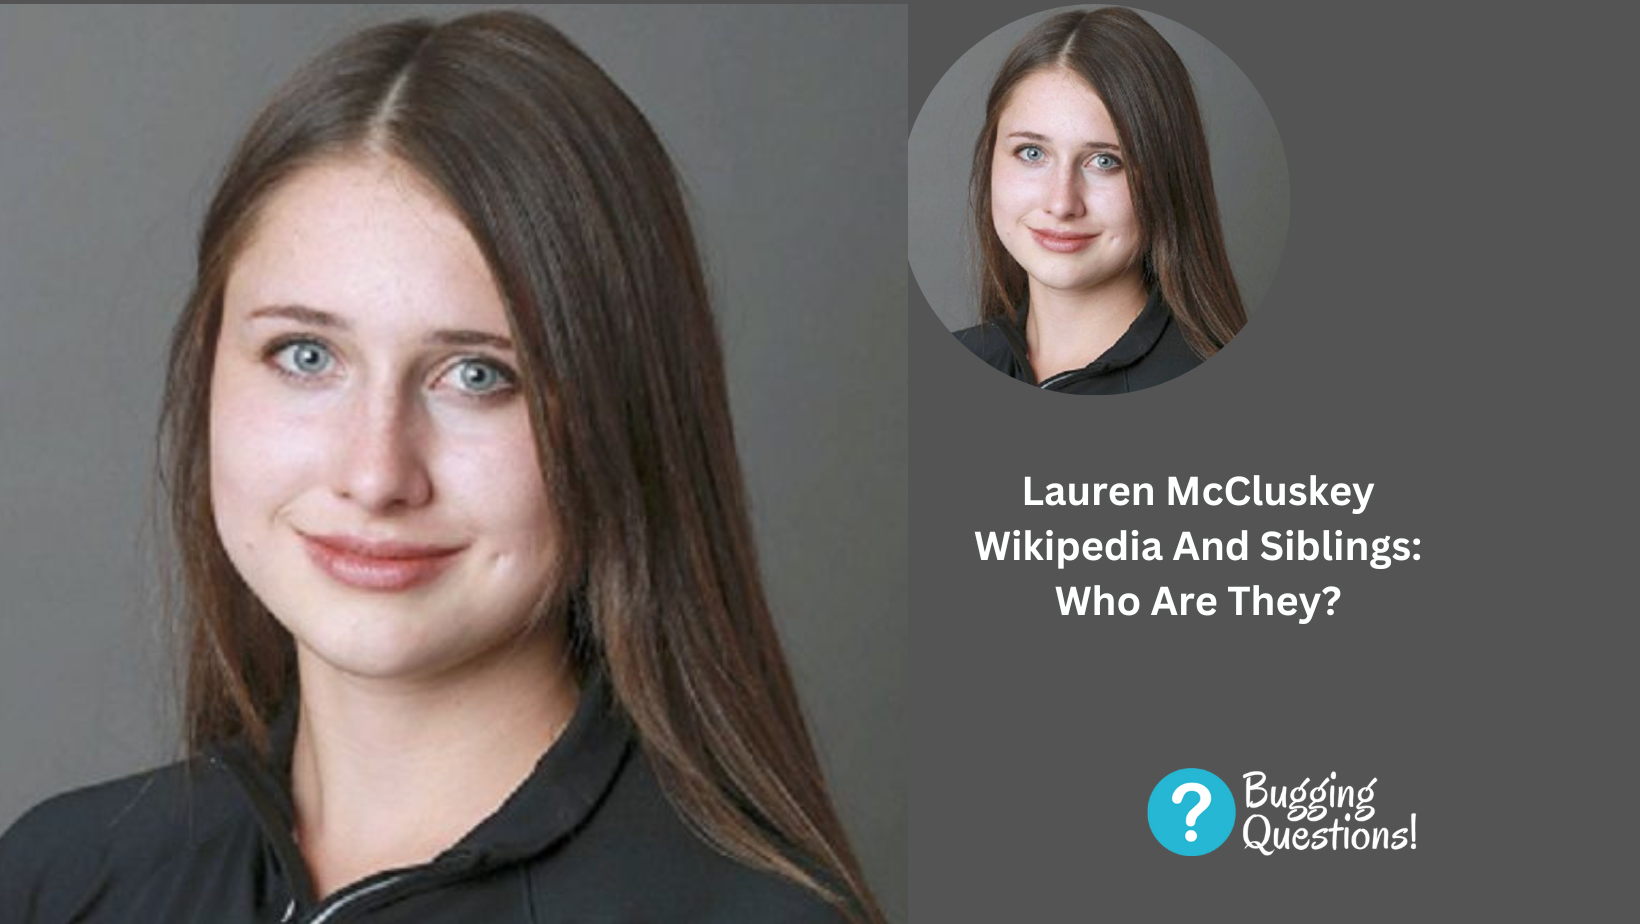 Lauren McCluskey Wikipedia And Siblings: Who Are They?